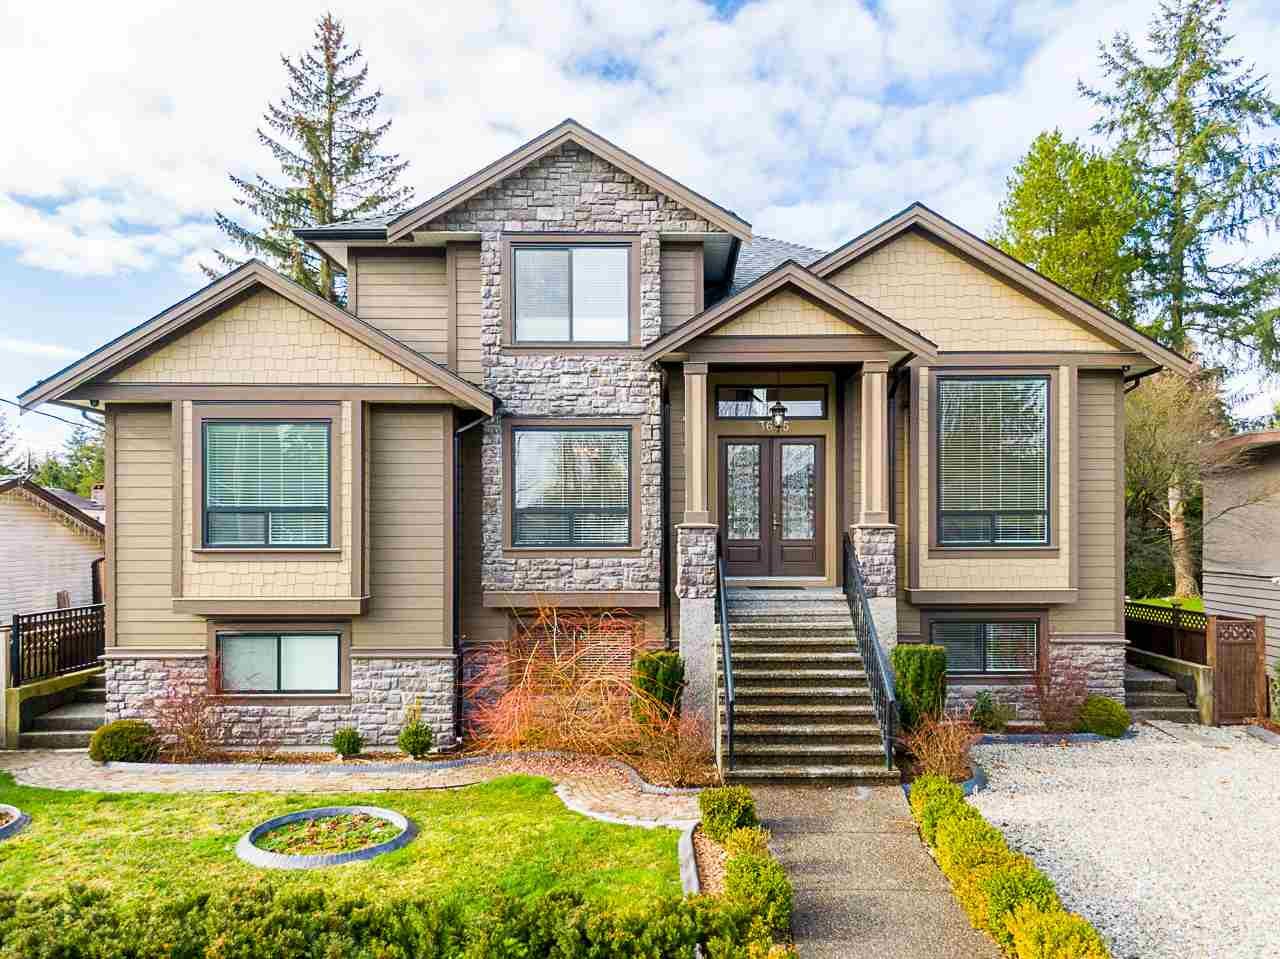 3675-Inverness-Street-Sold-By-Carolyn-Pogue-Best-Port-Moody-Realtor-1.jpeg